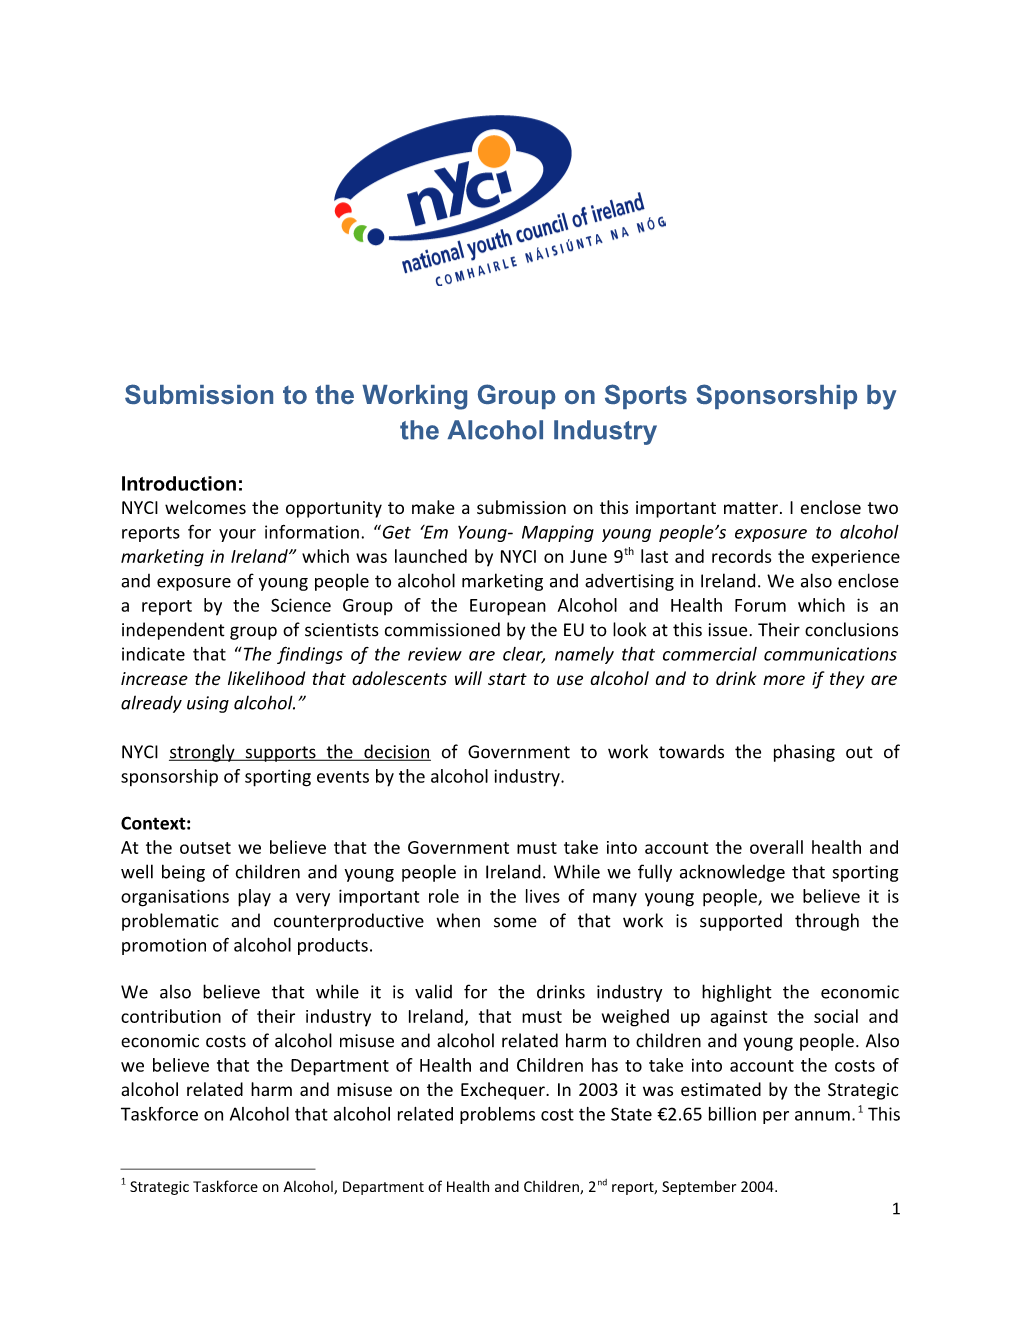 Submission to the Working Group on Sports Sponsorship by the Alcohol Industry